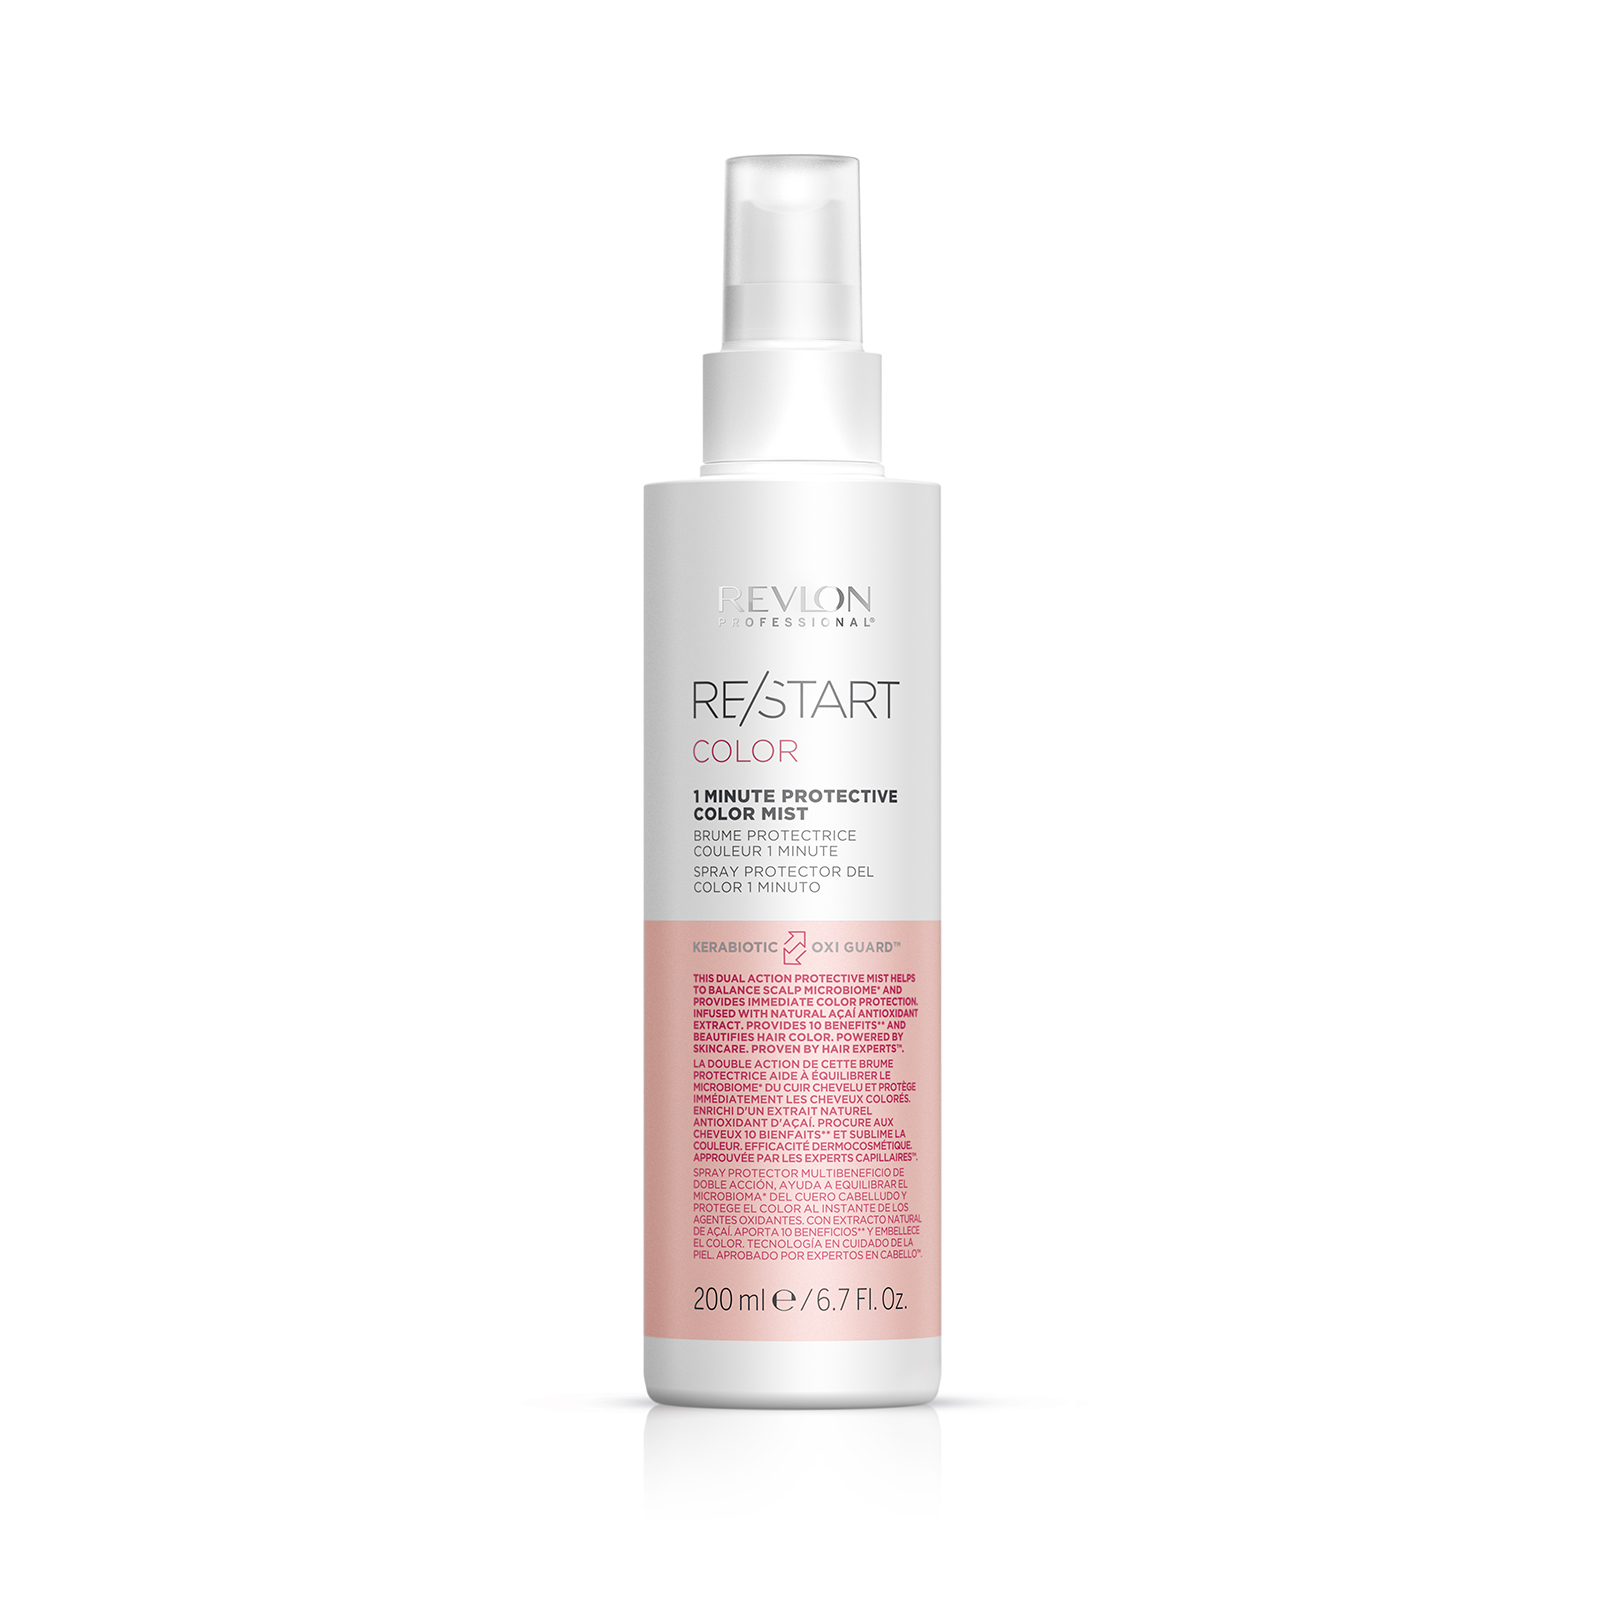 Re Start 1 Minute Protective Mist